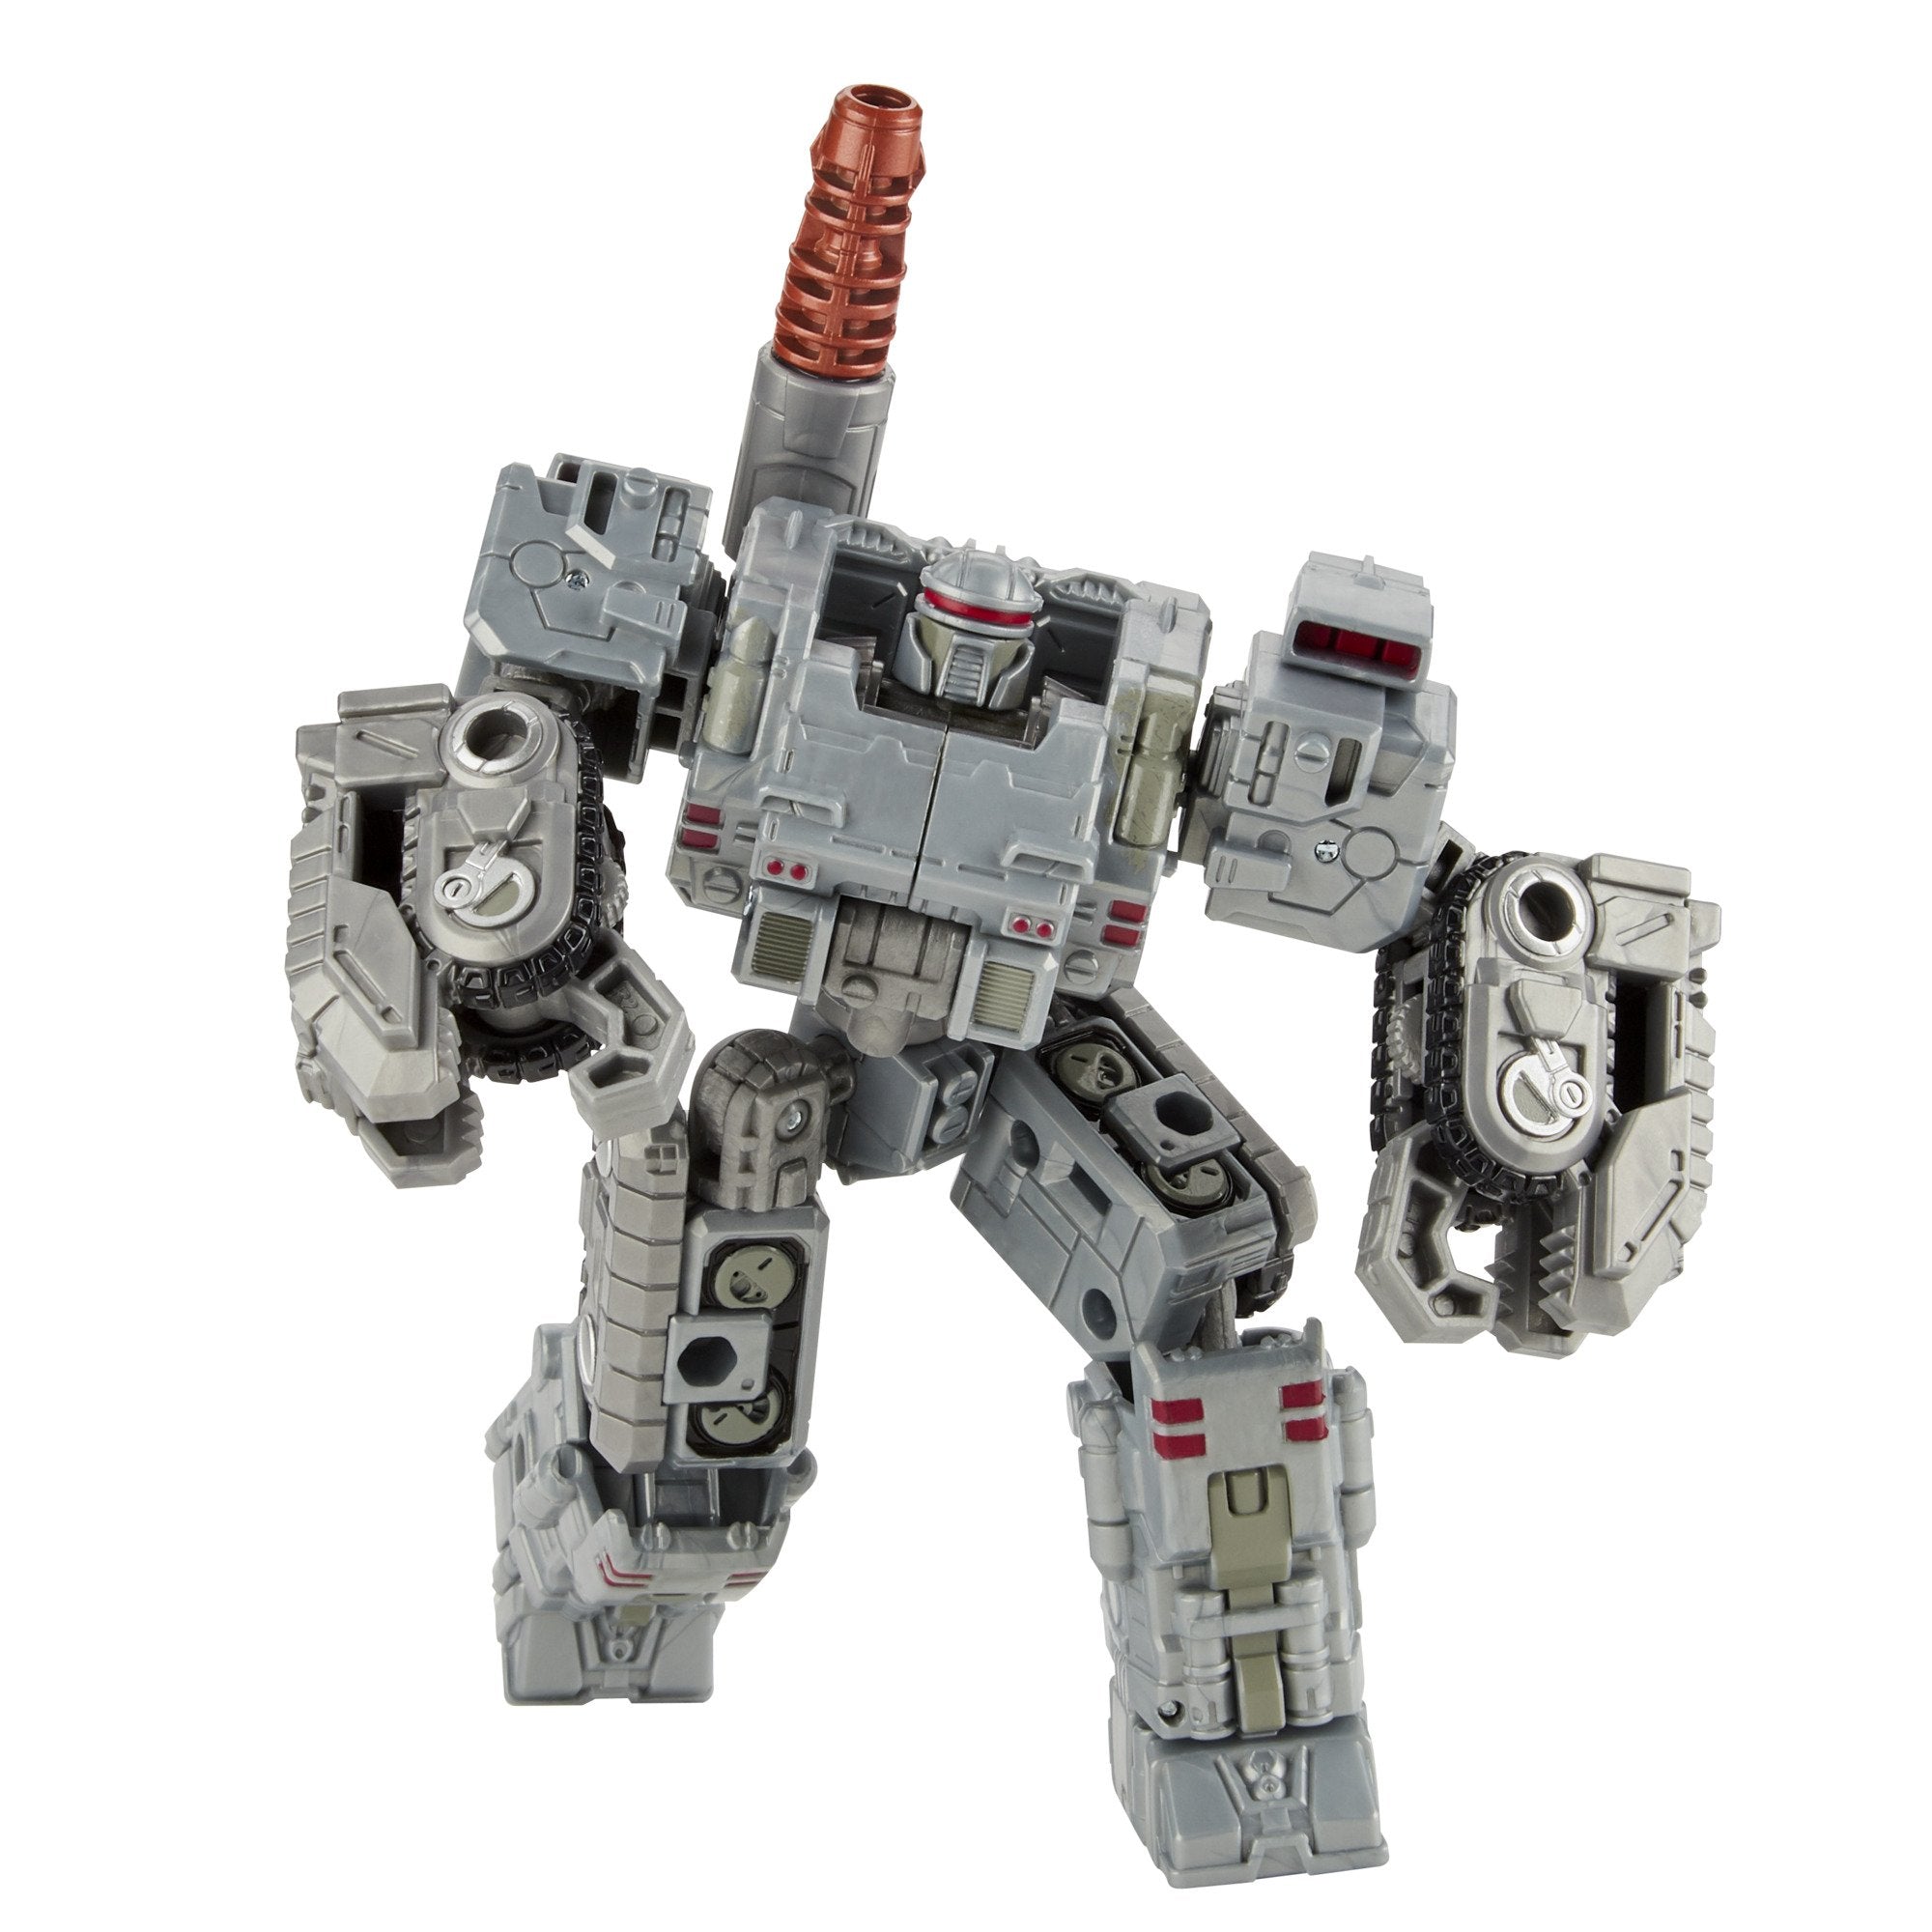 Hasbro - Transformers Generations - War for Cybertron - Deluxe Centurion Drone Weaponizer Pack